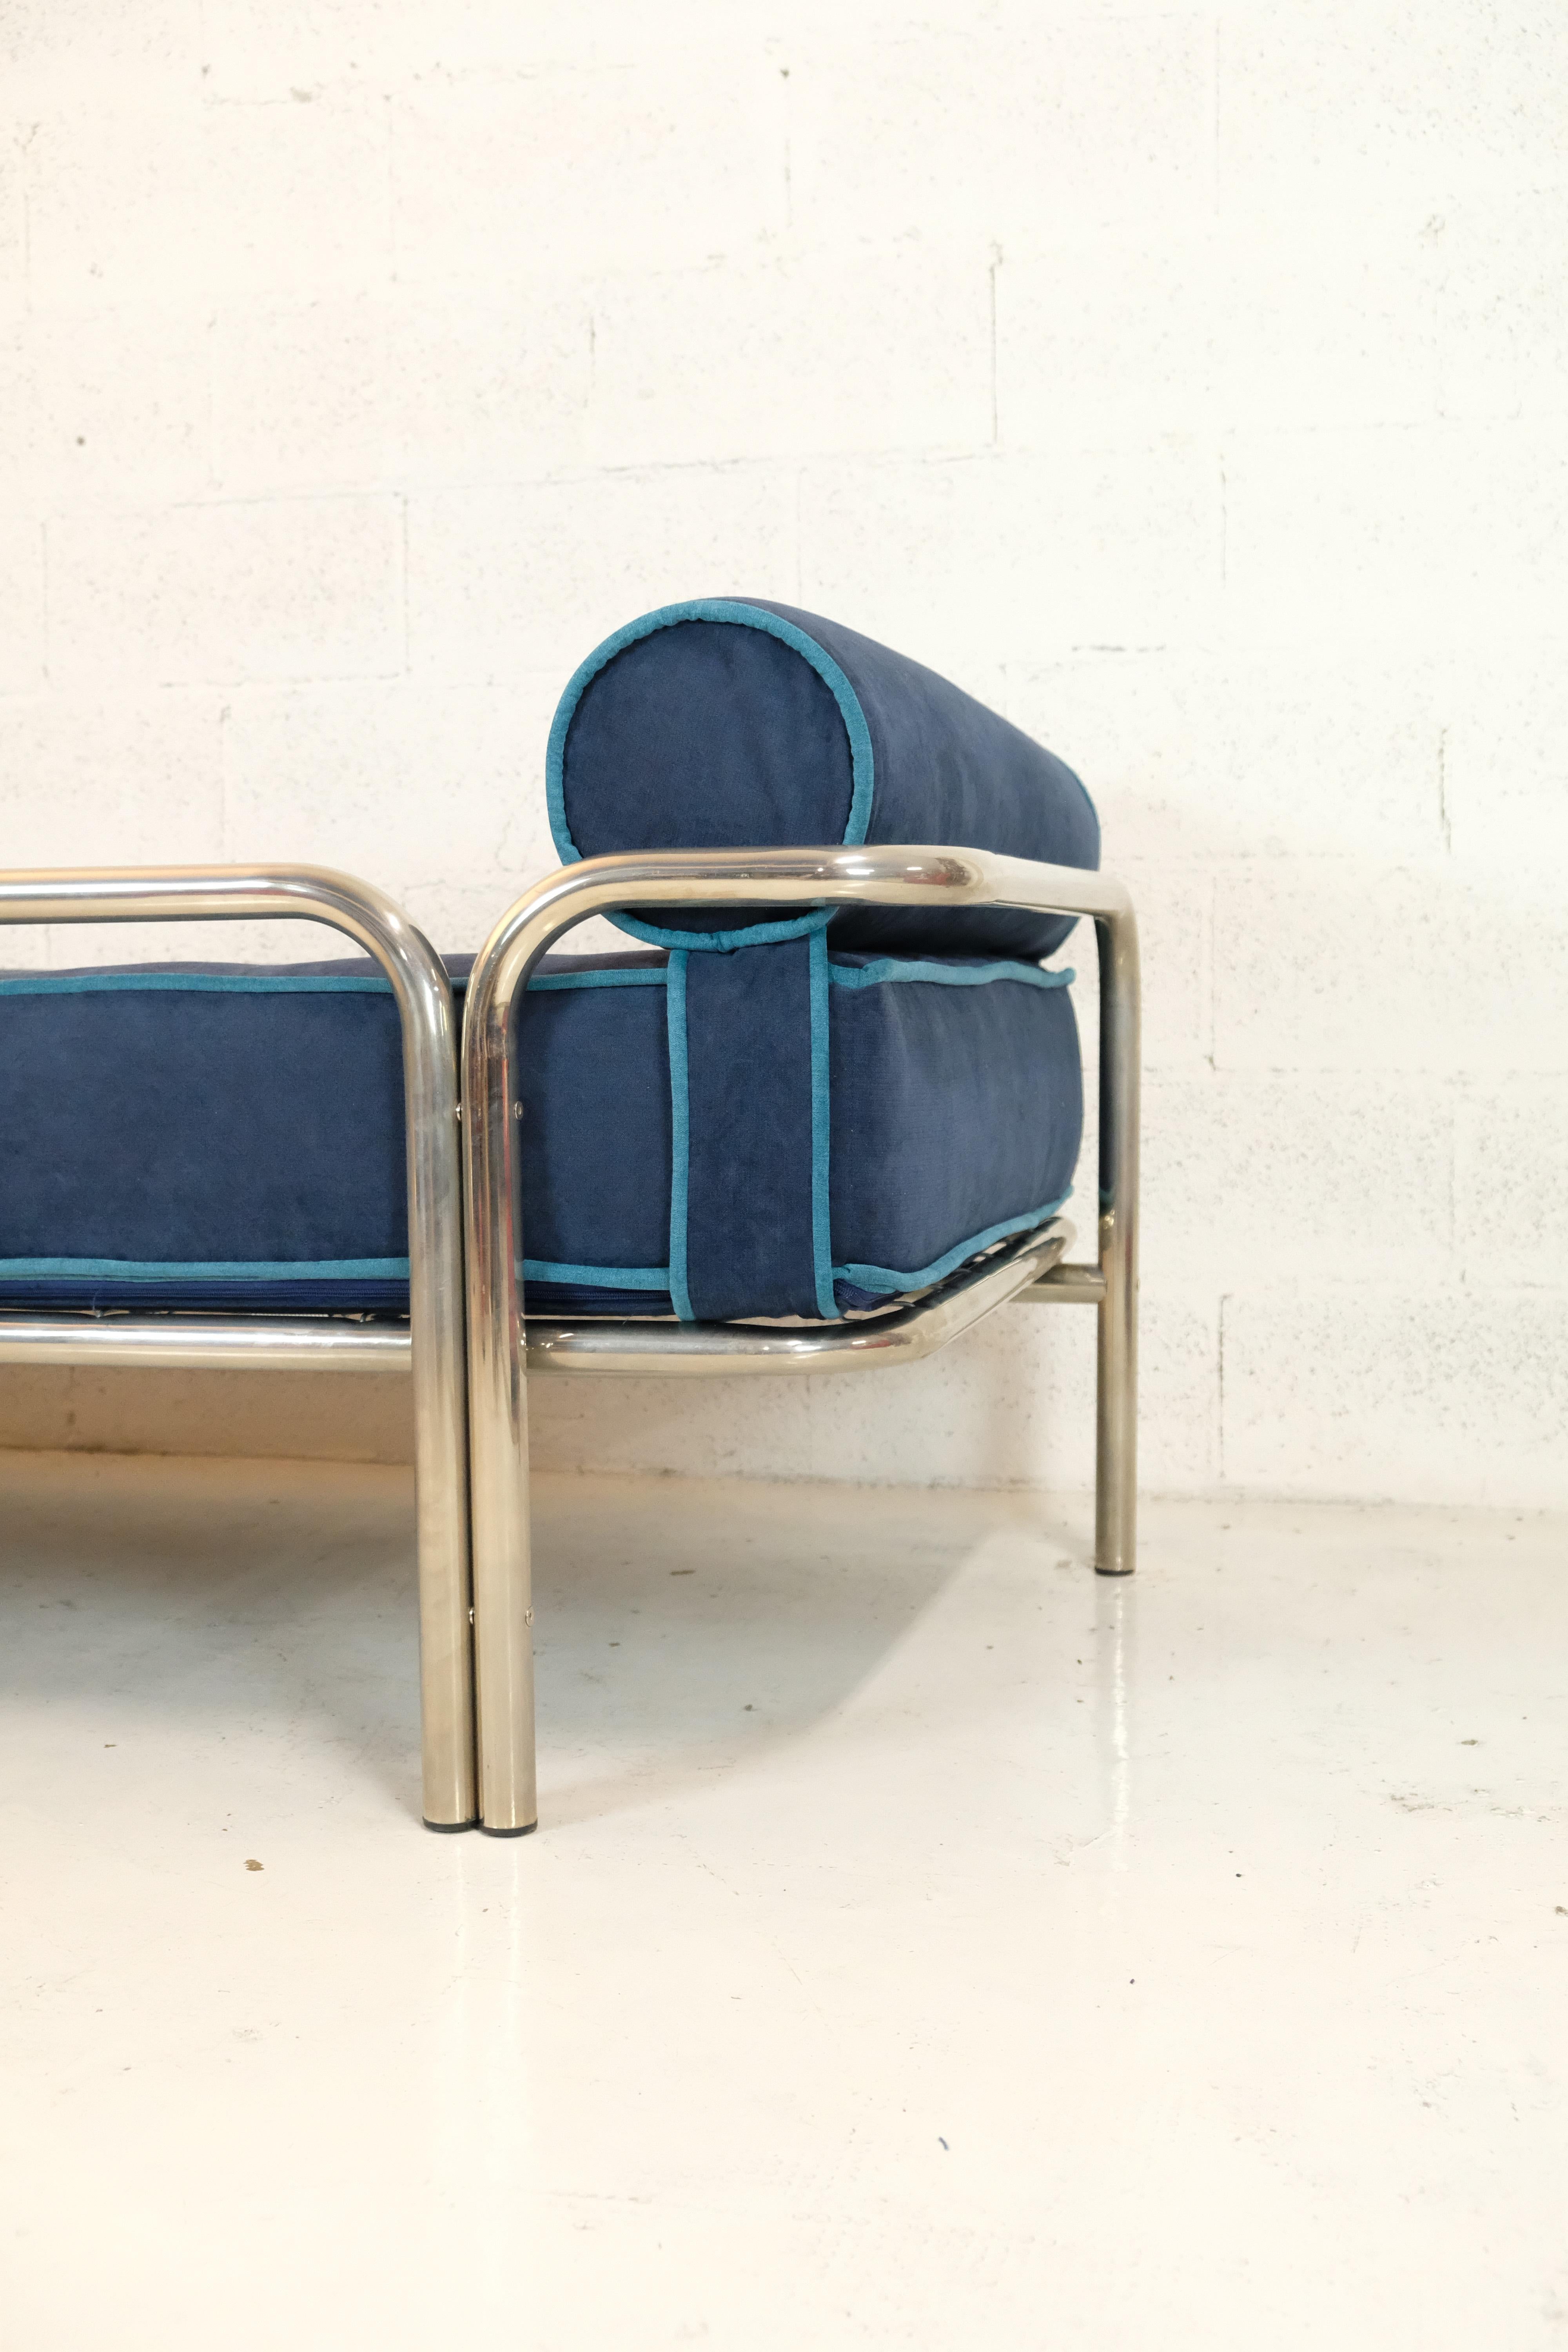 Steel Locus Solus daybed by Gae Aulenti for Poltronova 60s, 70s For Sale